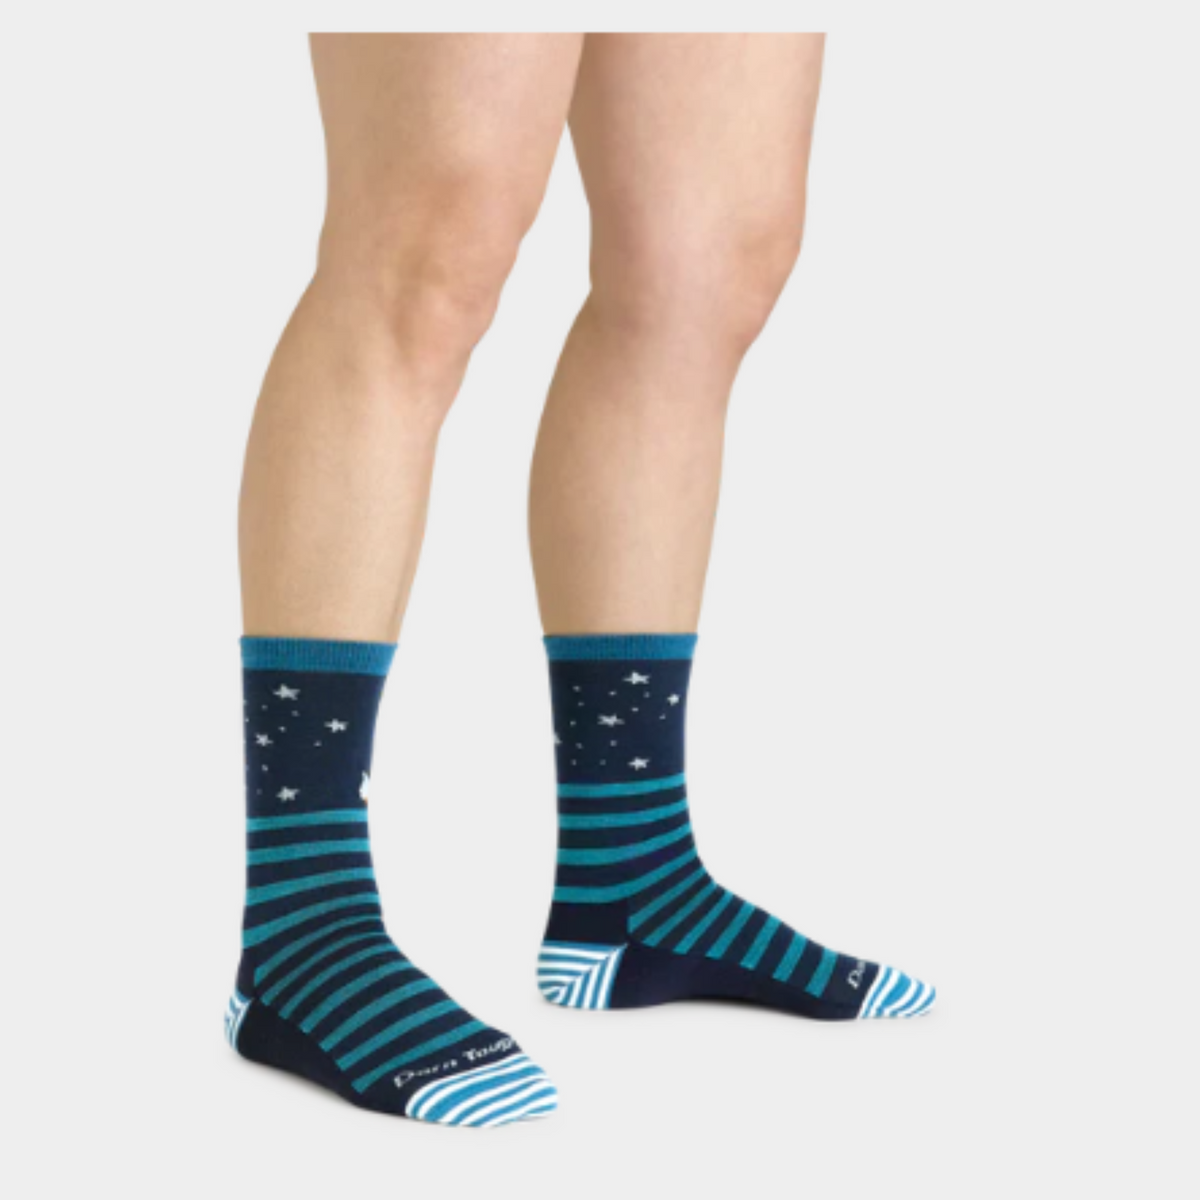 Darn Tough 6037 Animal Haus Lightweight Cushion Crew women&#39;s sock featuring navy blue sock with teal stripes and stars at top. Sock shown on model&#39;s feet.. 